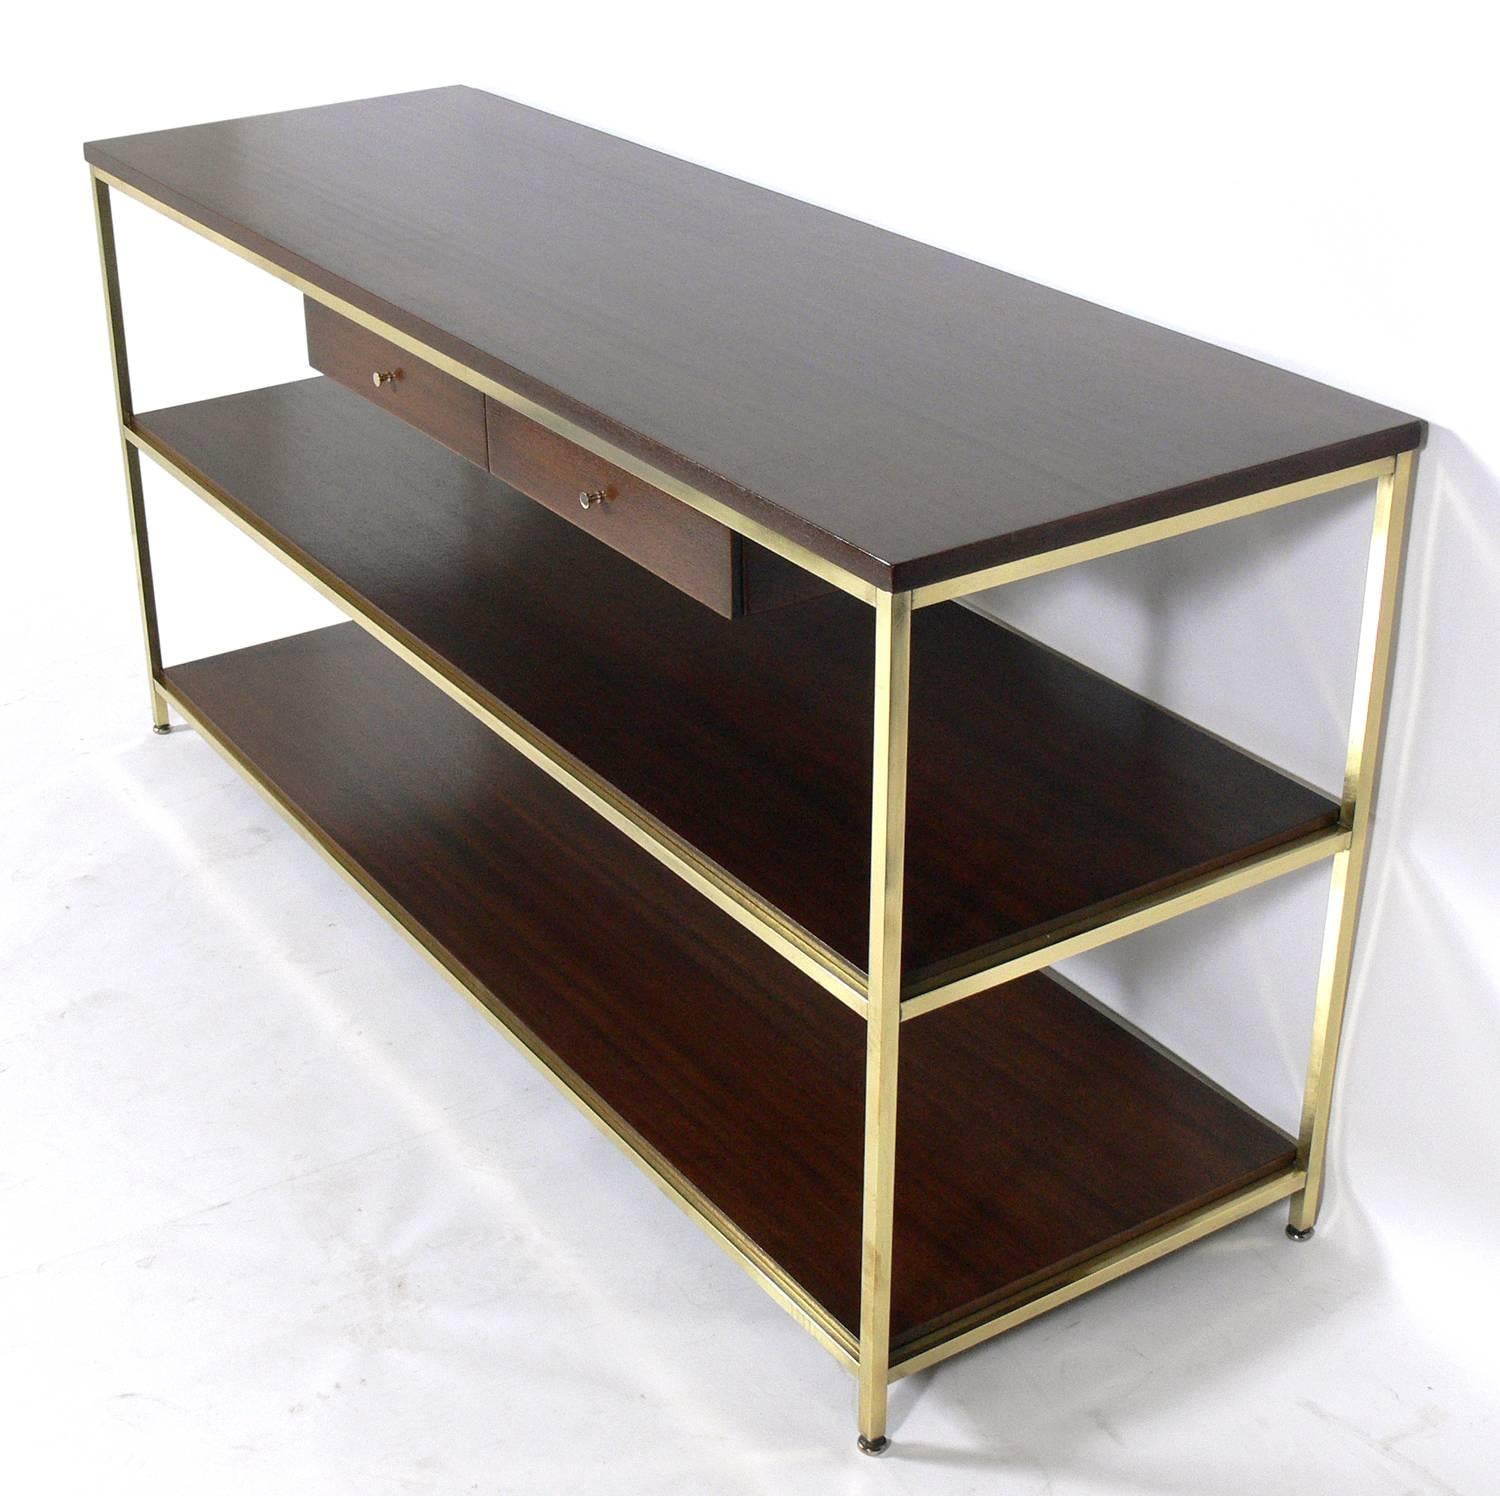 Paul McCobb Console Table, American, circa 1950s. This piece has been completely restored. Refinished in a medium brown walnut, and brass frame polished and lacquered. It is a versatile size and can be used as a console or sofa table, media center,